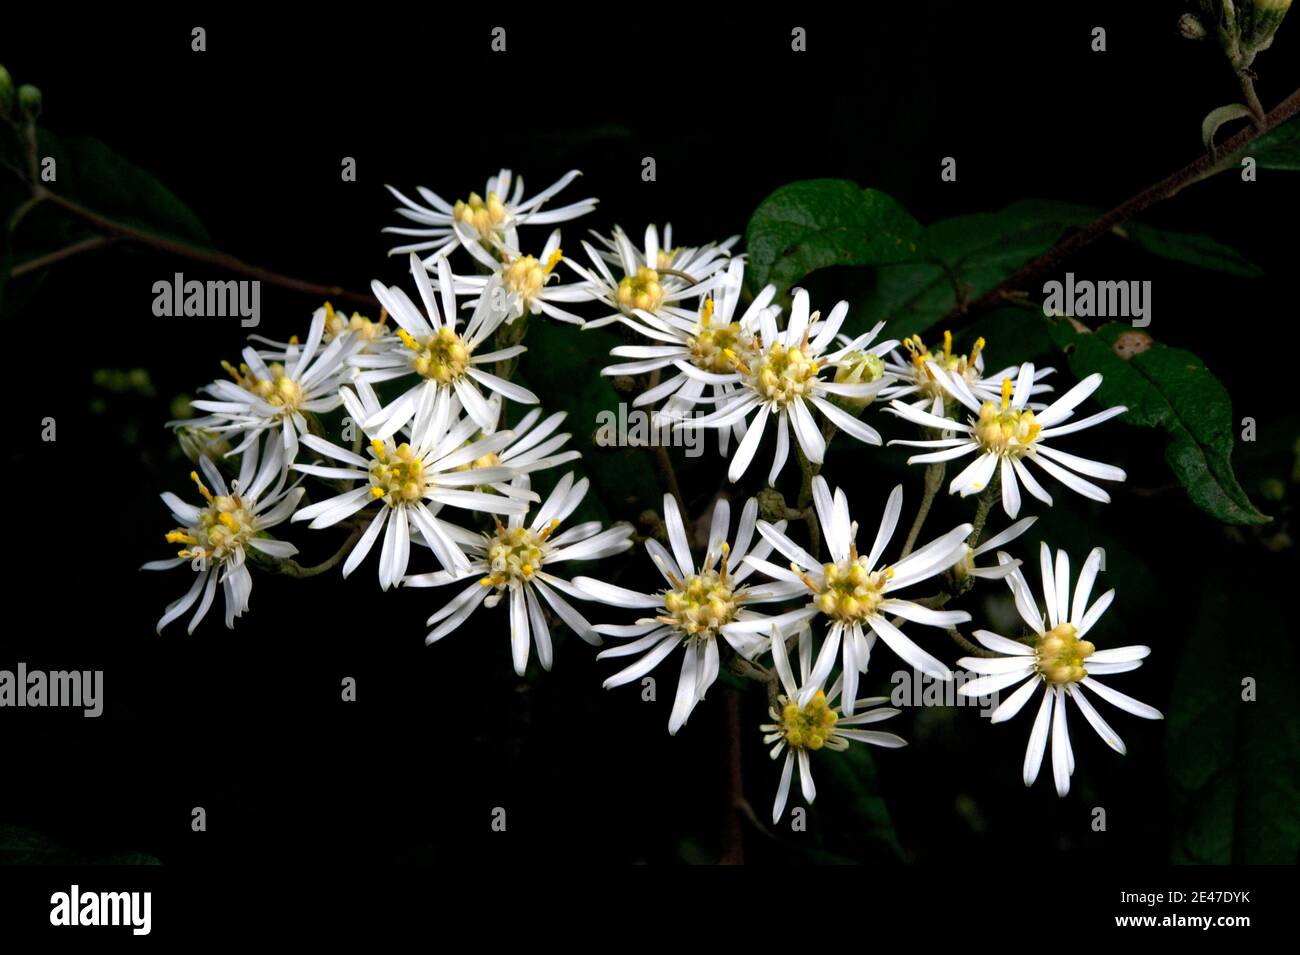 Daisies are usually small plants, growing in your lawn - these Sticky Daisy Bushes (Olearia Lirata) are quite big - and very showy when in flower! Stock Photo